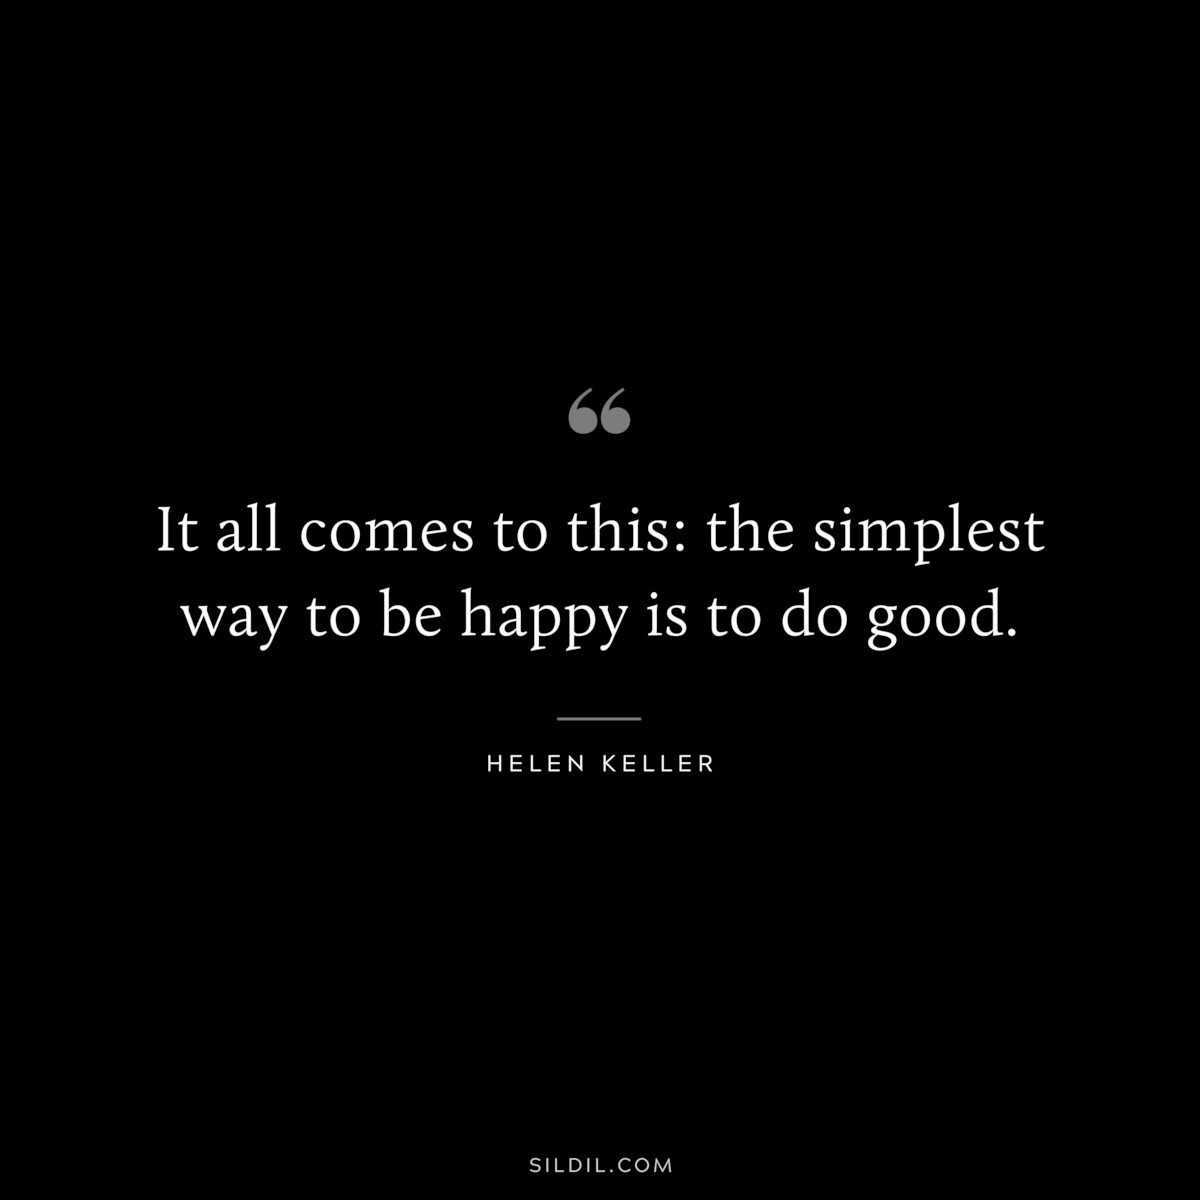 It all comes to this: the simplest way to be happy is to do good. ― Helen Keller